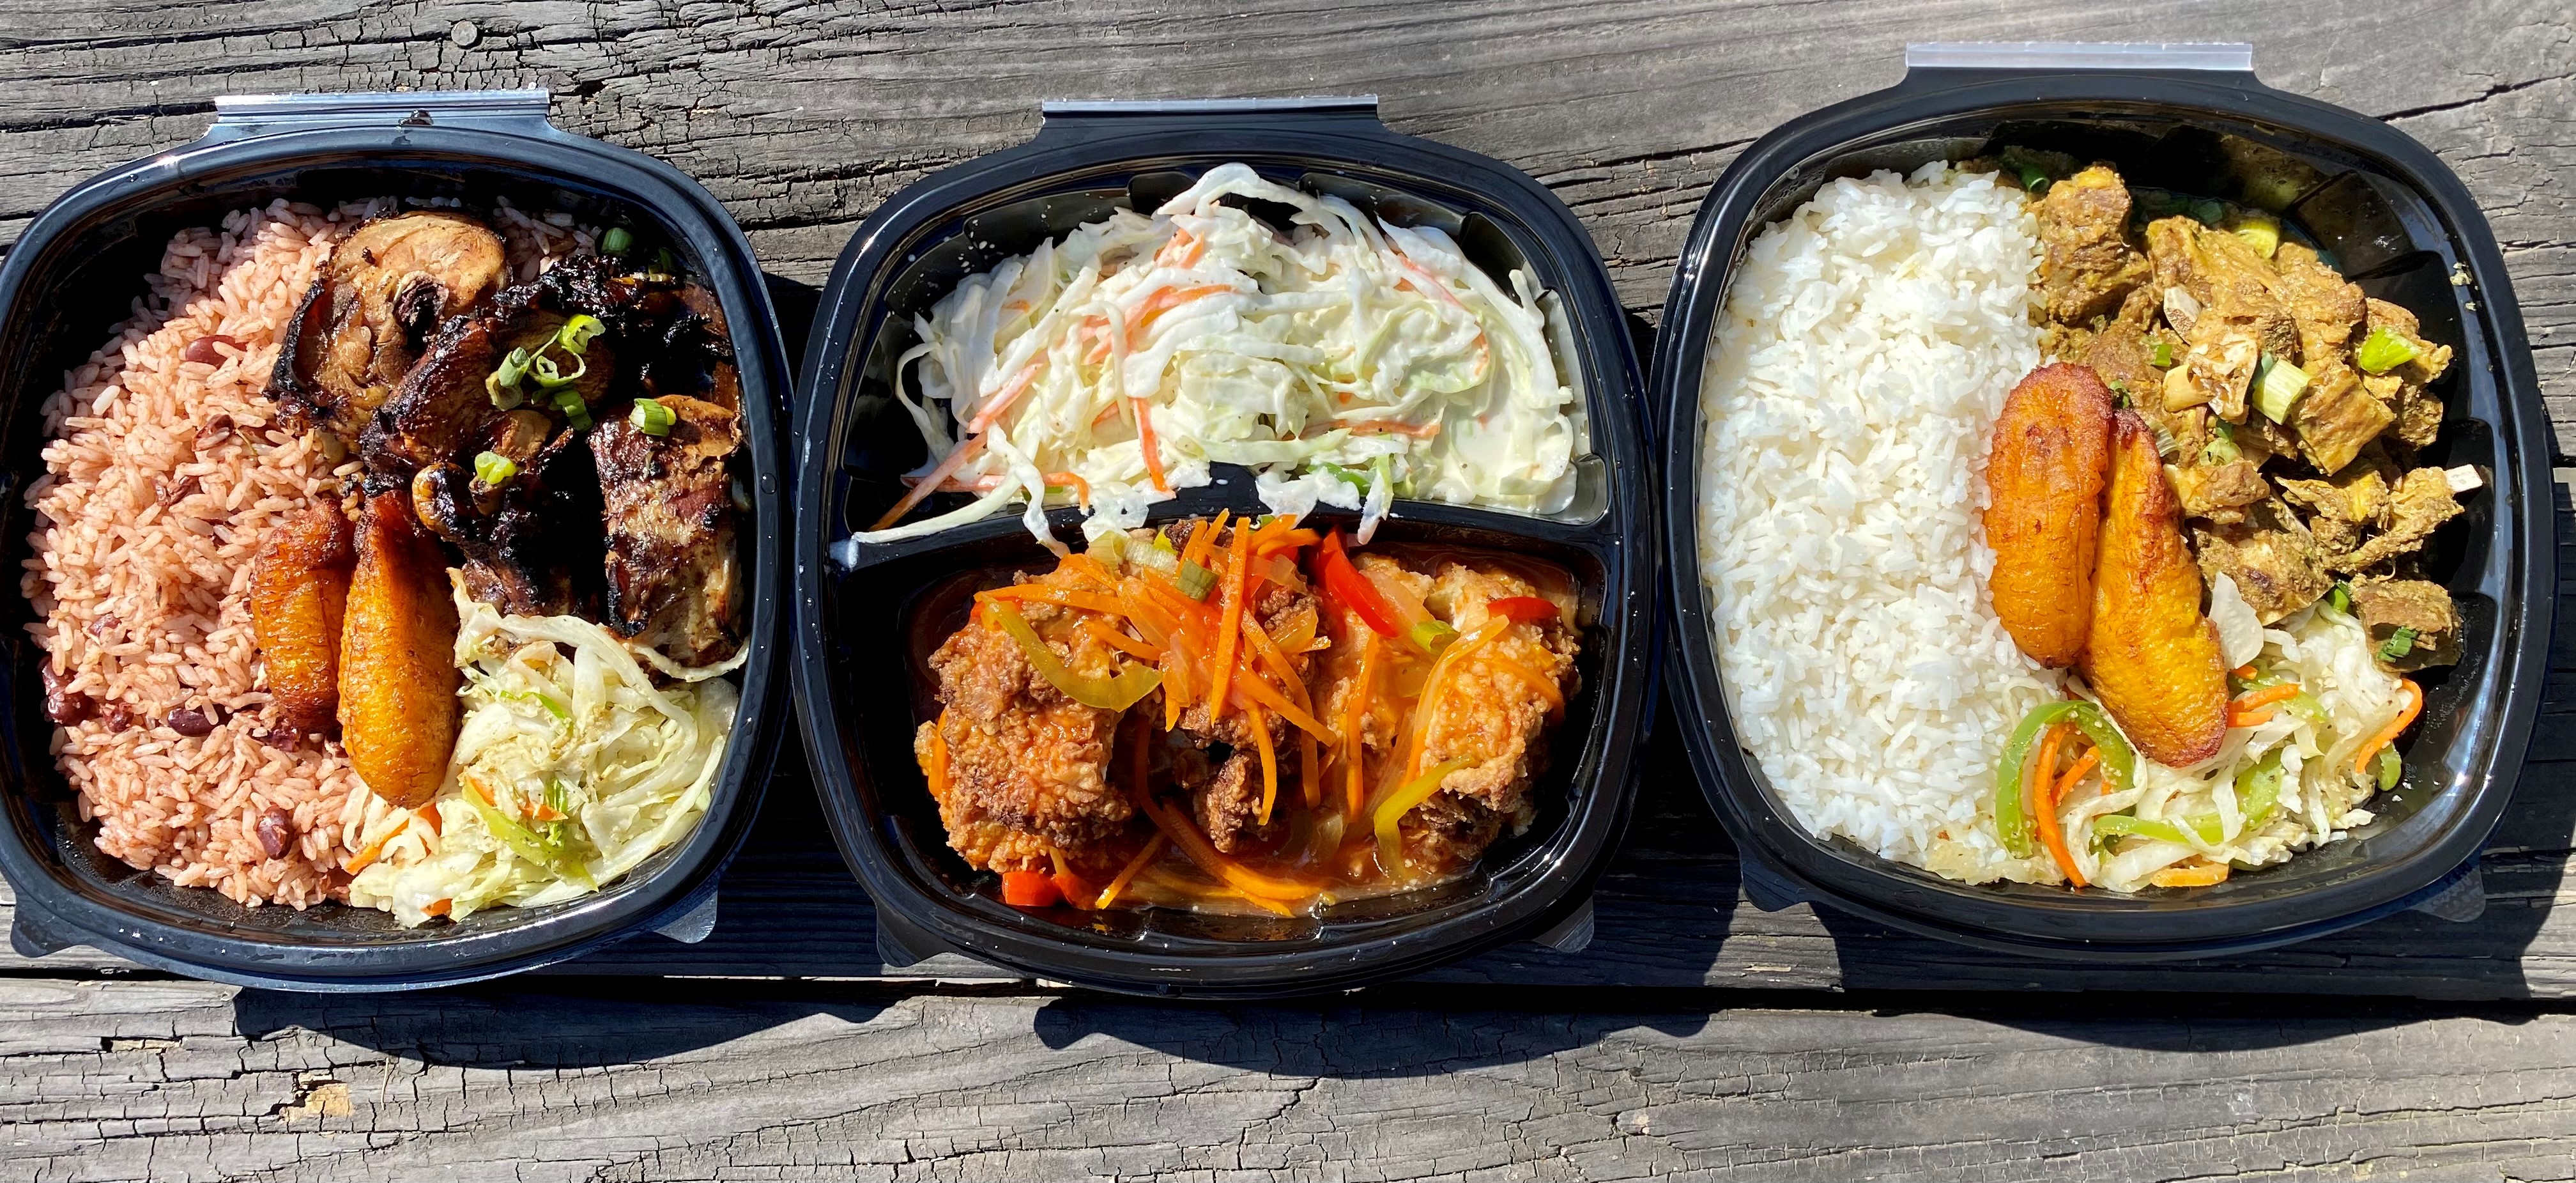 How pandemic bento boxes became their own care package and a new